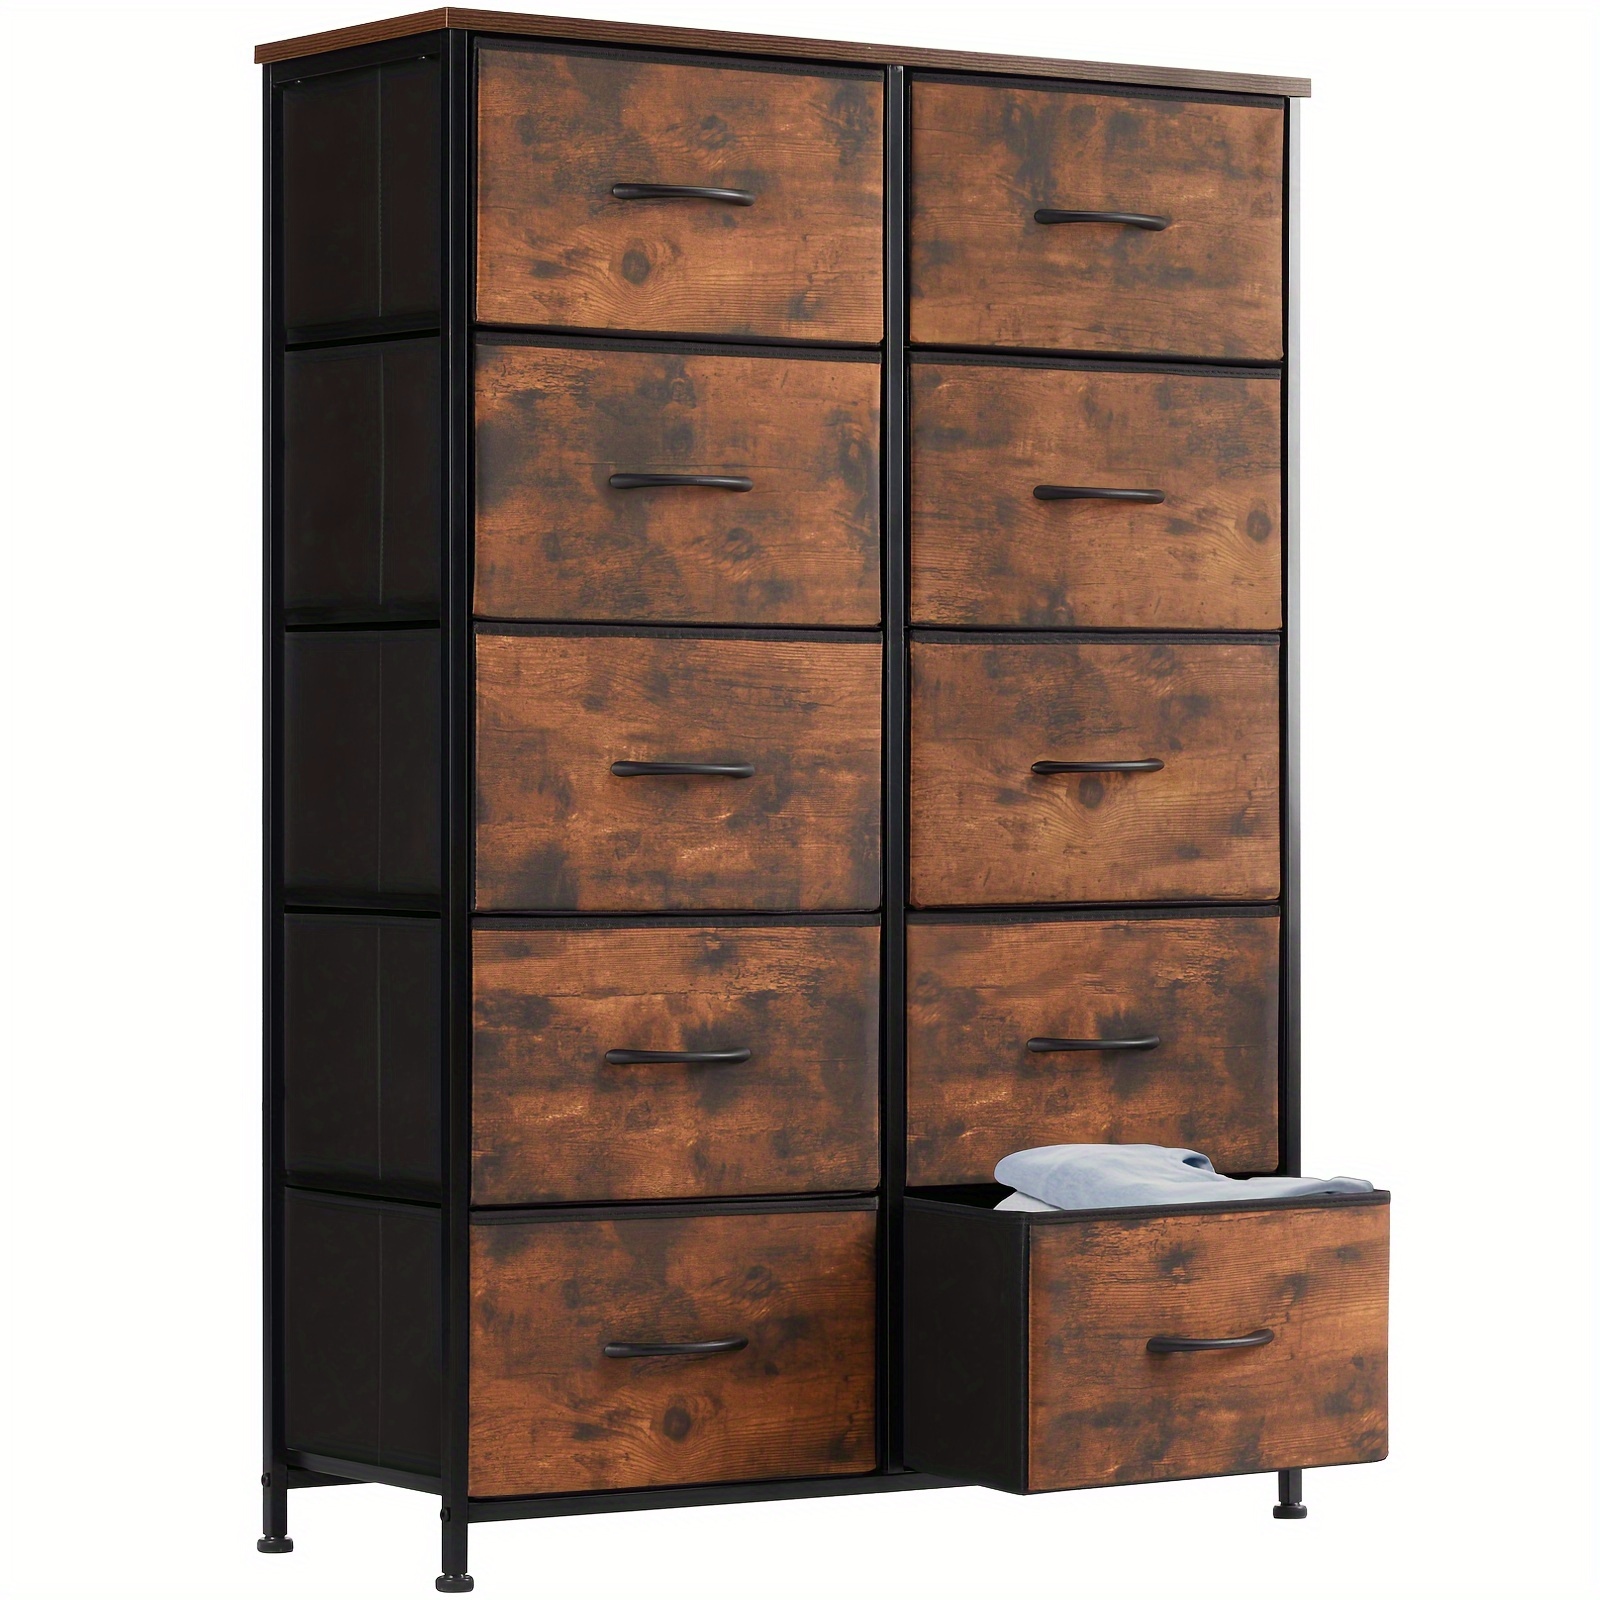 

Sweetcrispy Dresser For Bedroom 10 Drawers, Storage Chest Of Drawers With Fabric Bins, Tall Dresser With Sturdy Steel Frame Clothes Organizer Wood Top For Closet, Hallway, Living Room